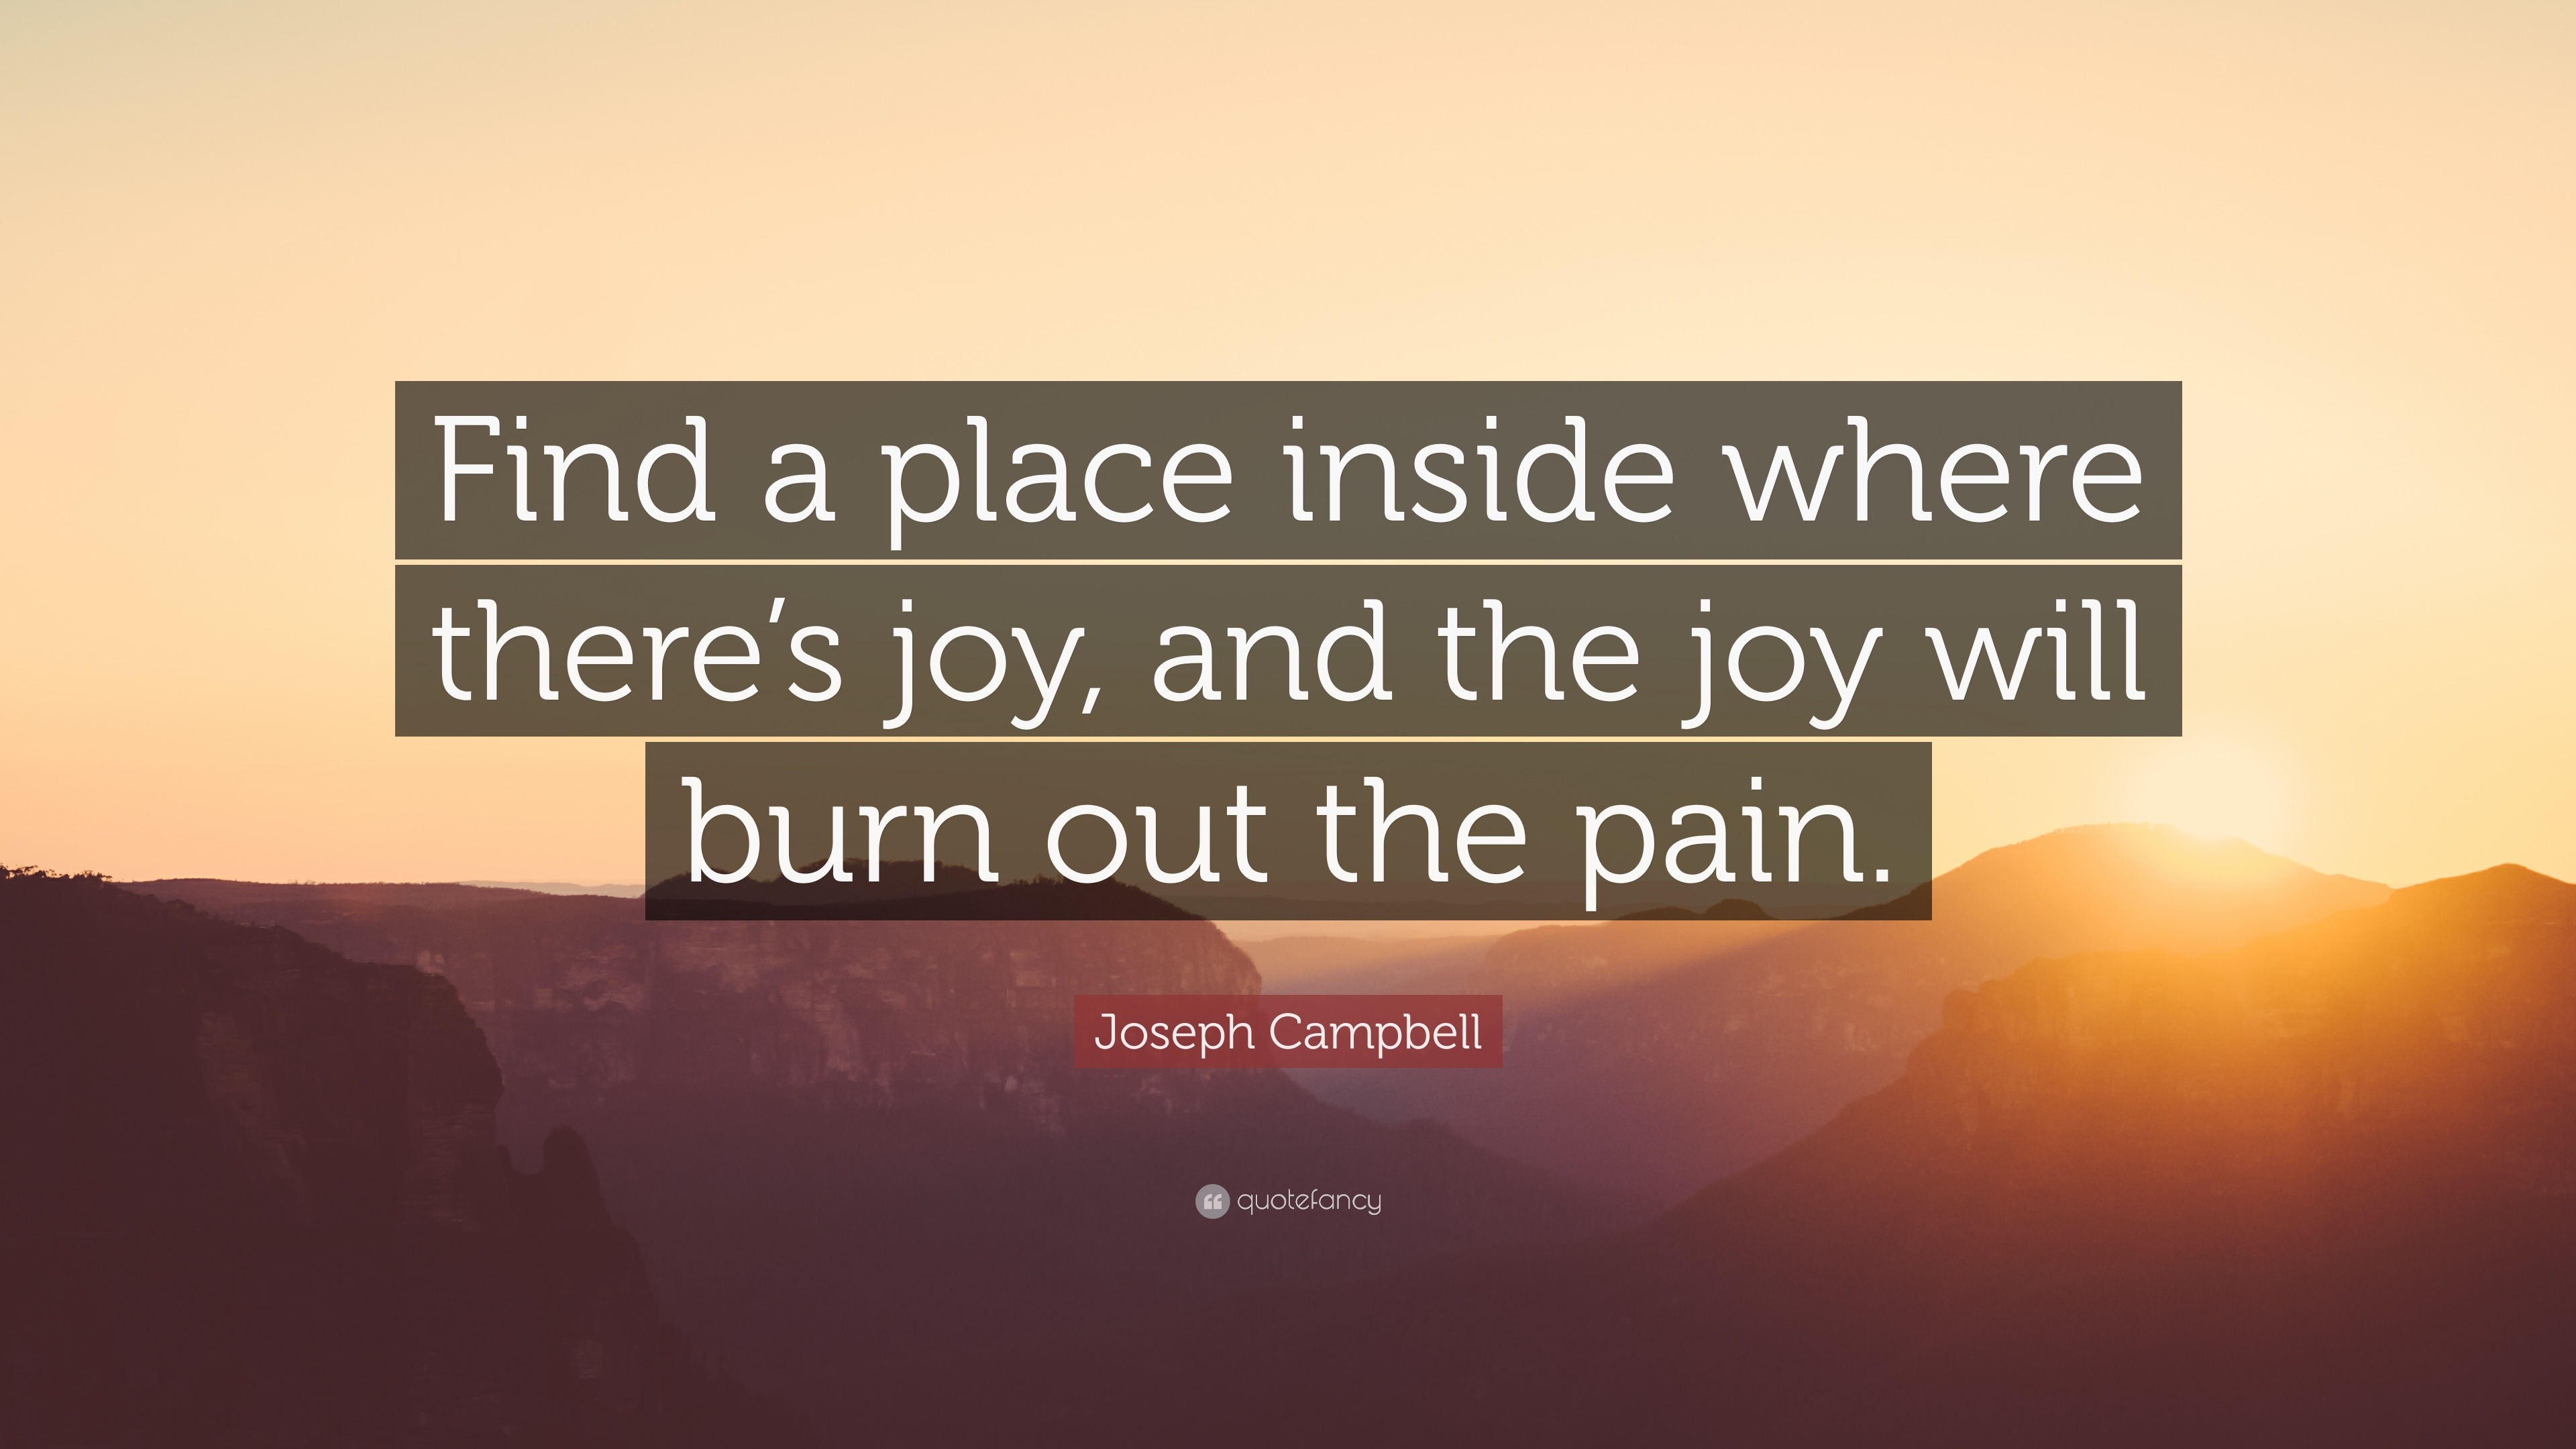 27842 Joseph Campbell Quote Find a place inside where there s joy and